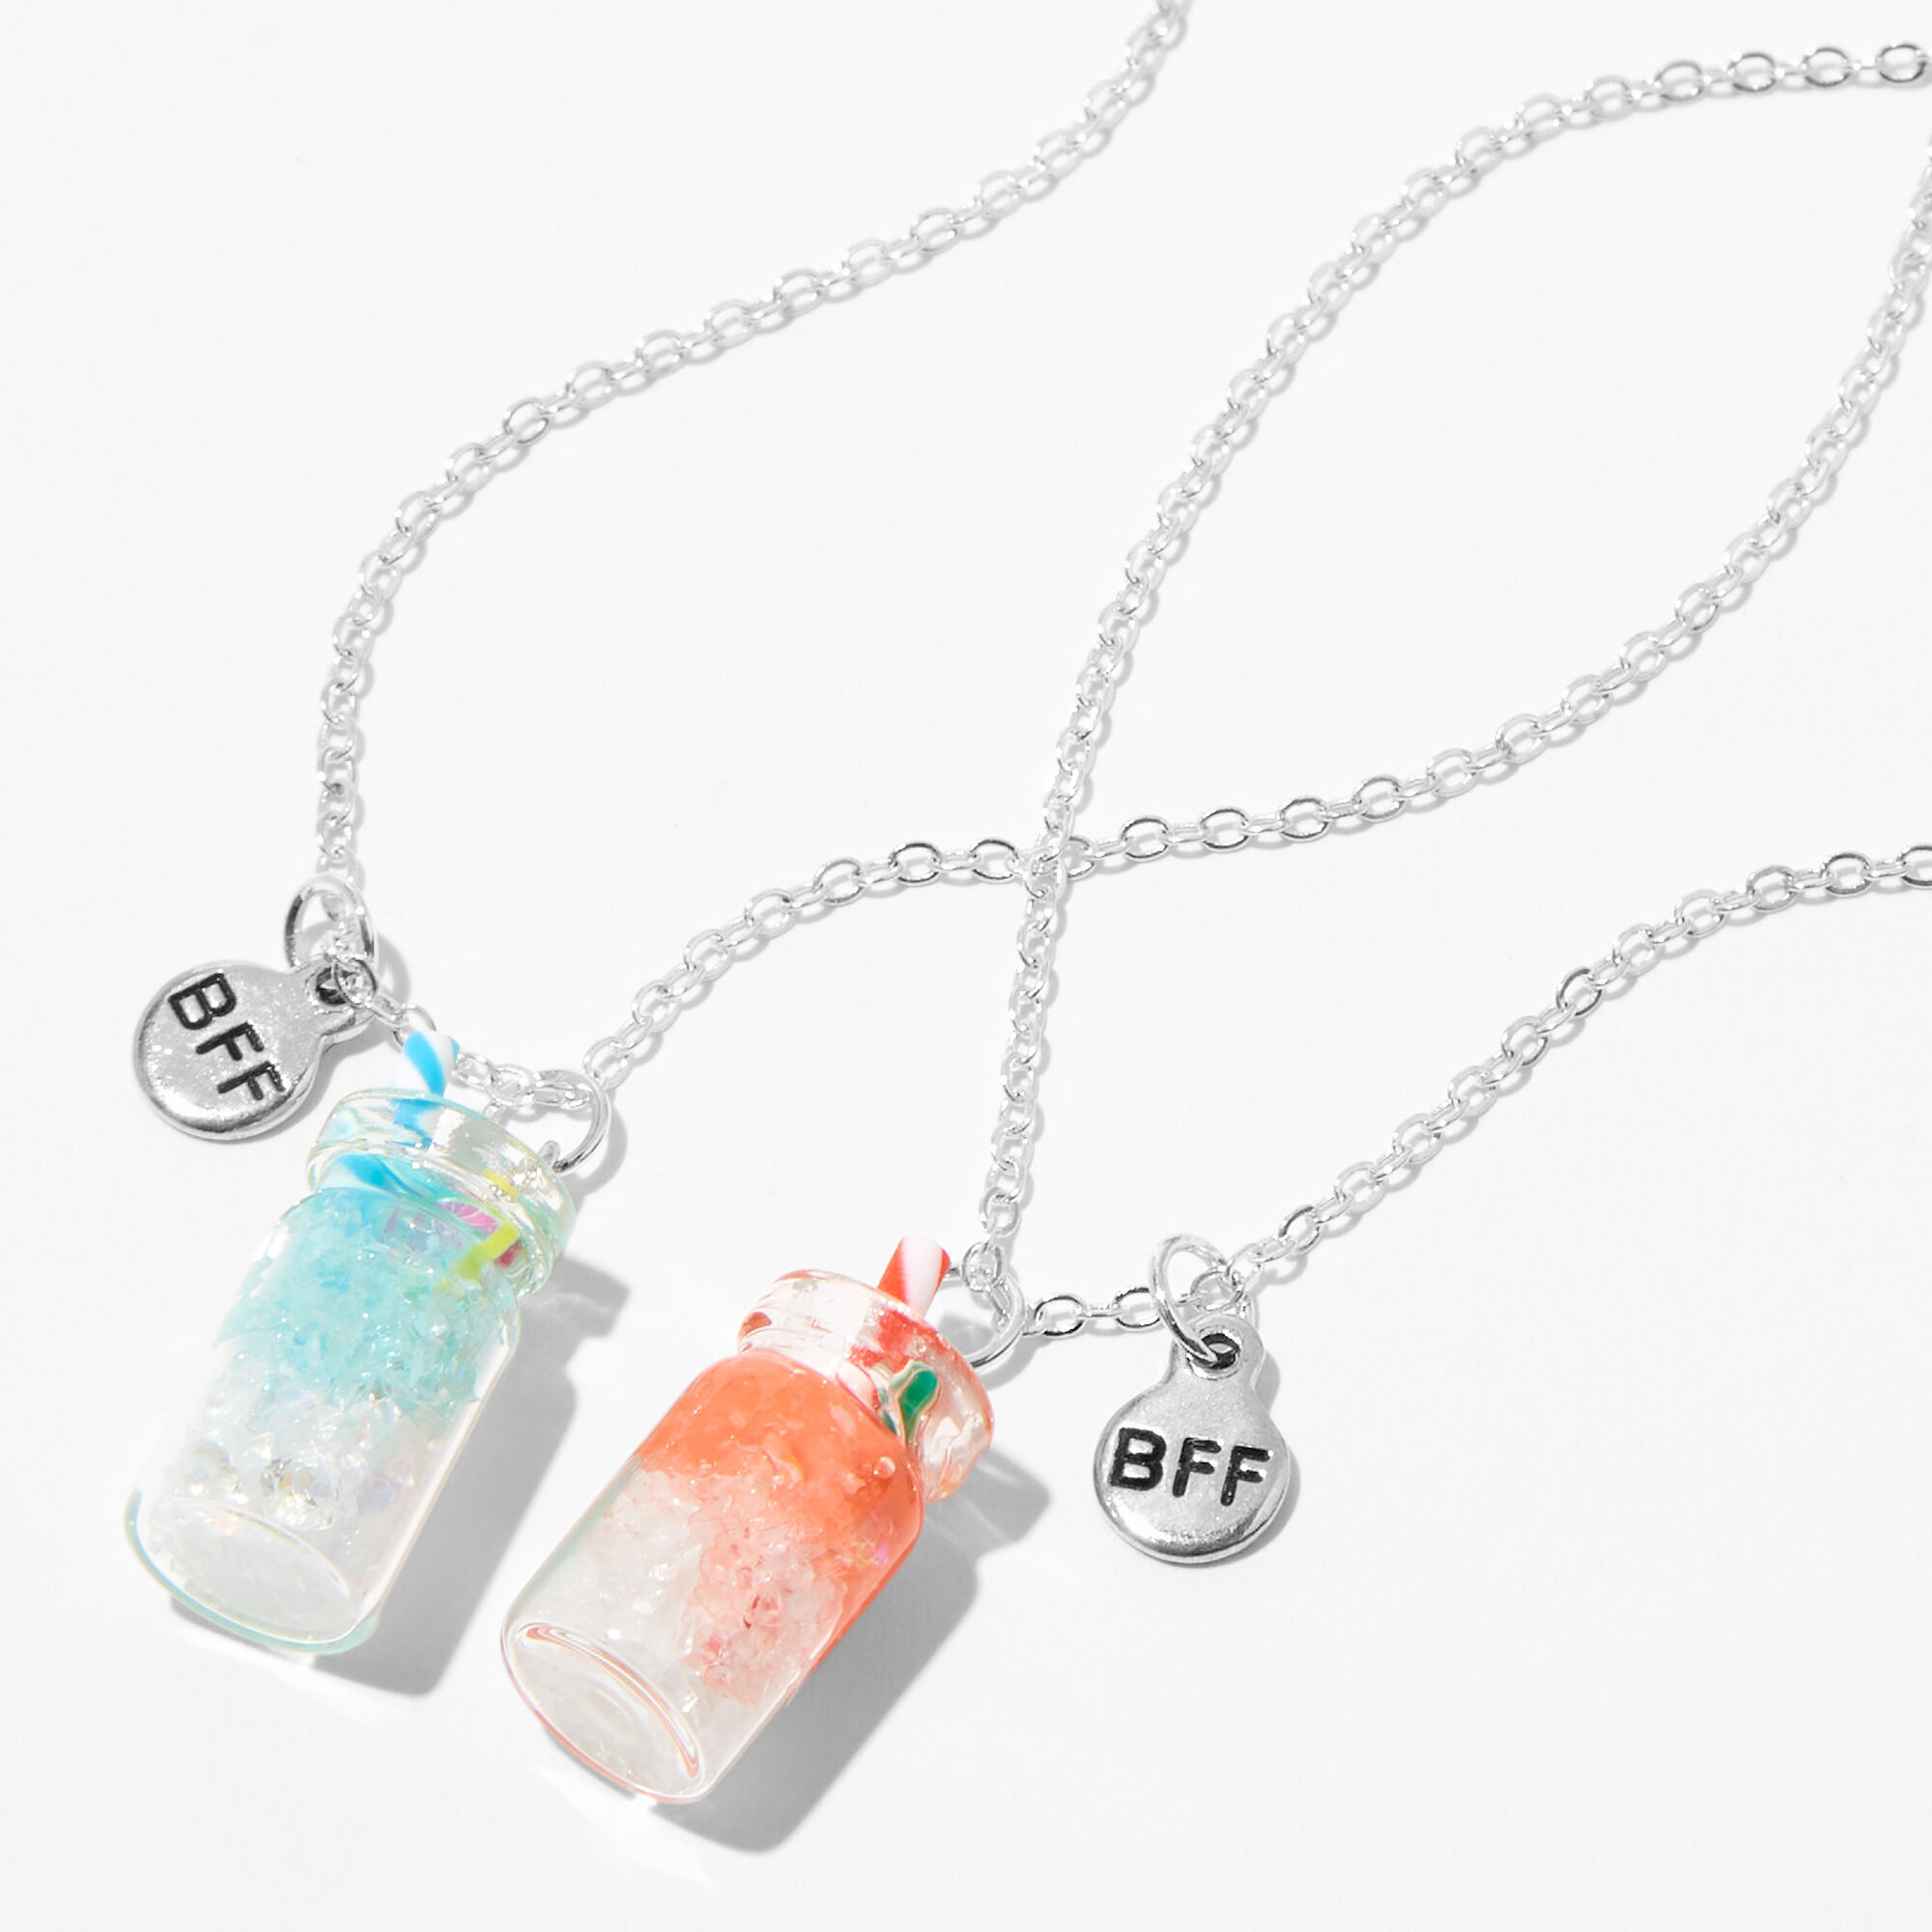 View Claires Best Friends Cold Drink Pendant Necklaces 2 Pack Silver information